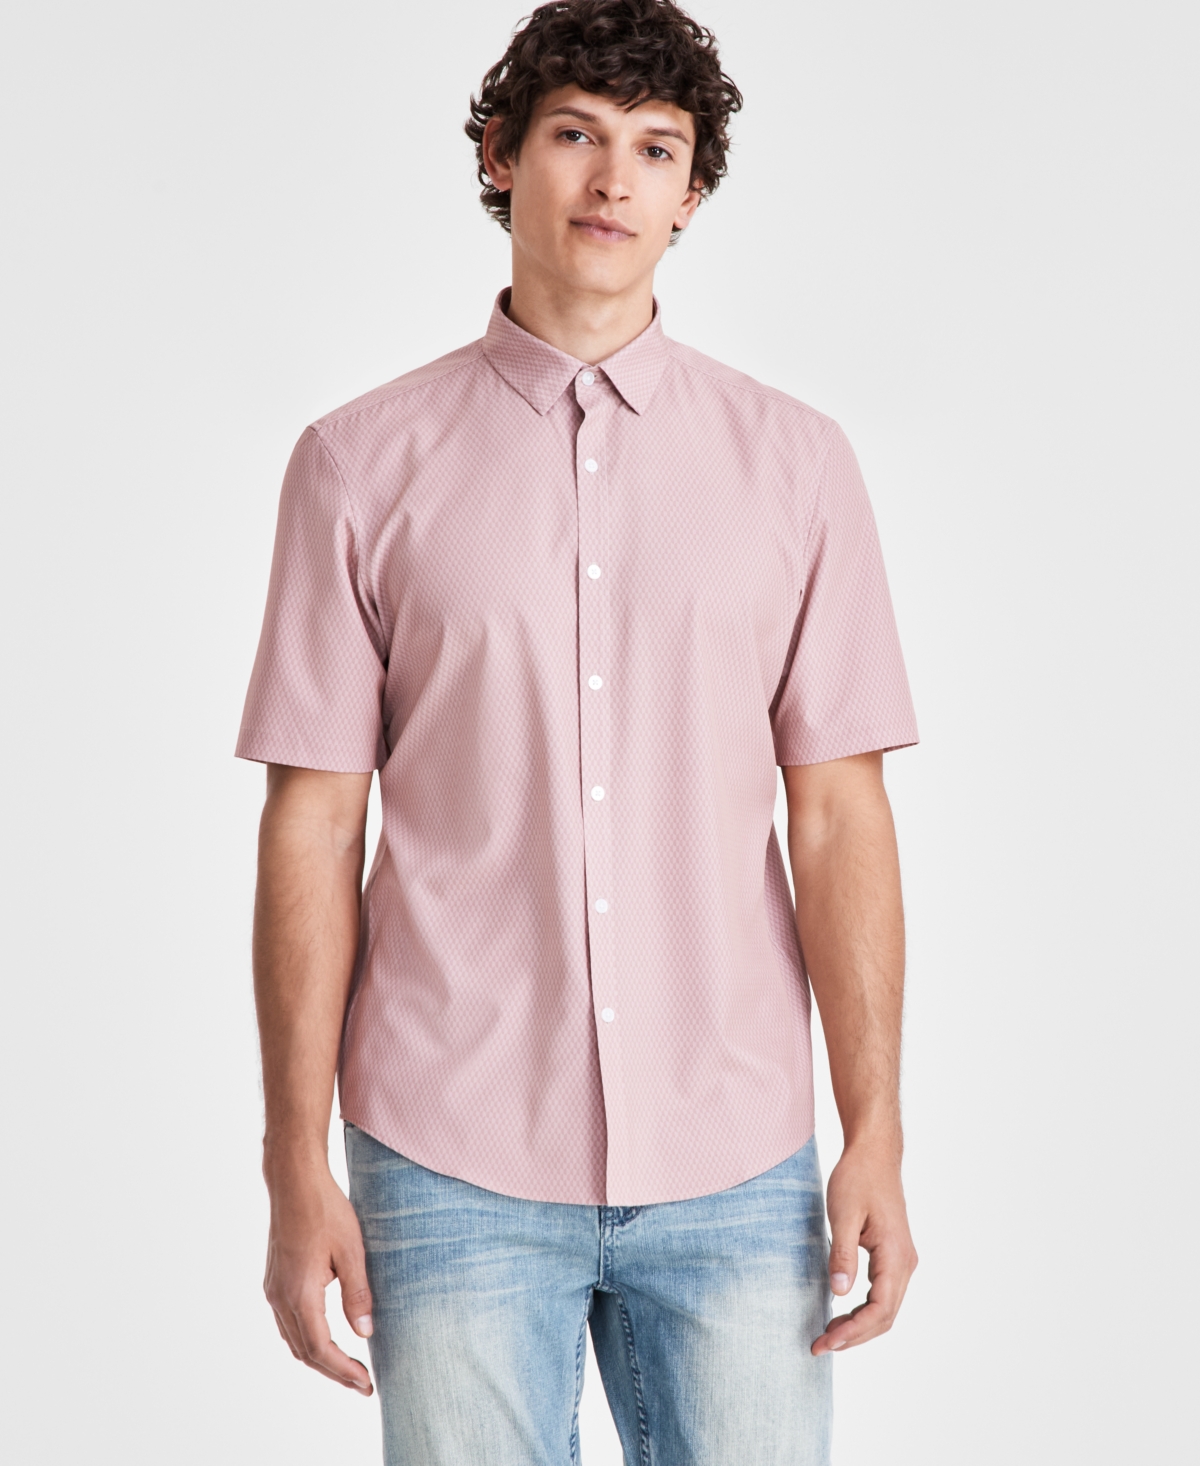 Men's Geometric Short Sleeve Button Front Performance Shirt, Created for Macy's - Pottery Clay